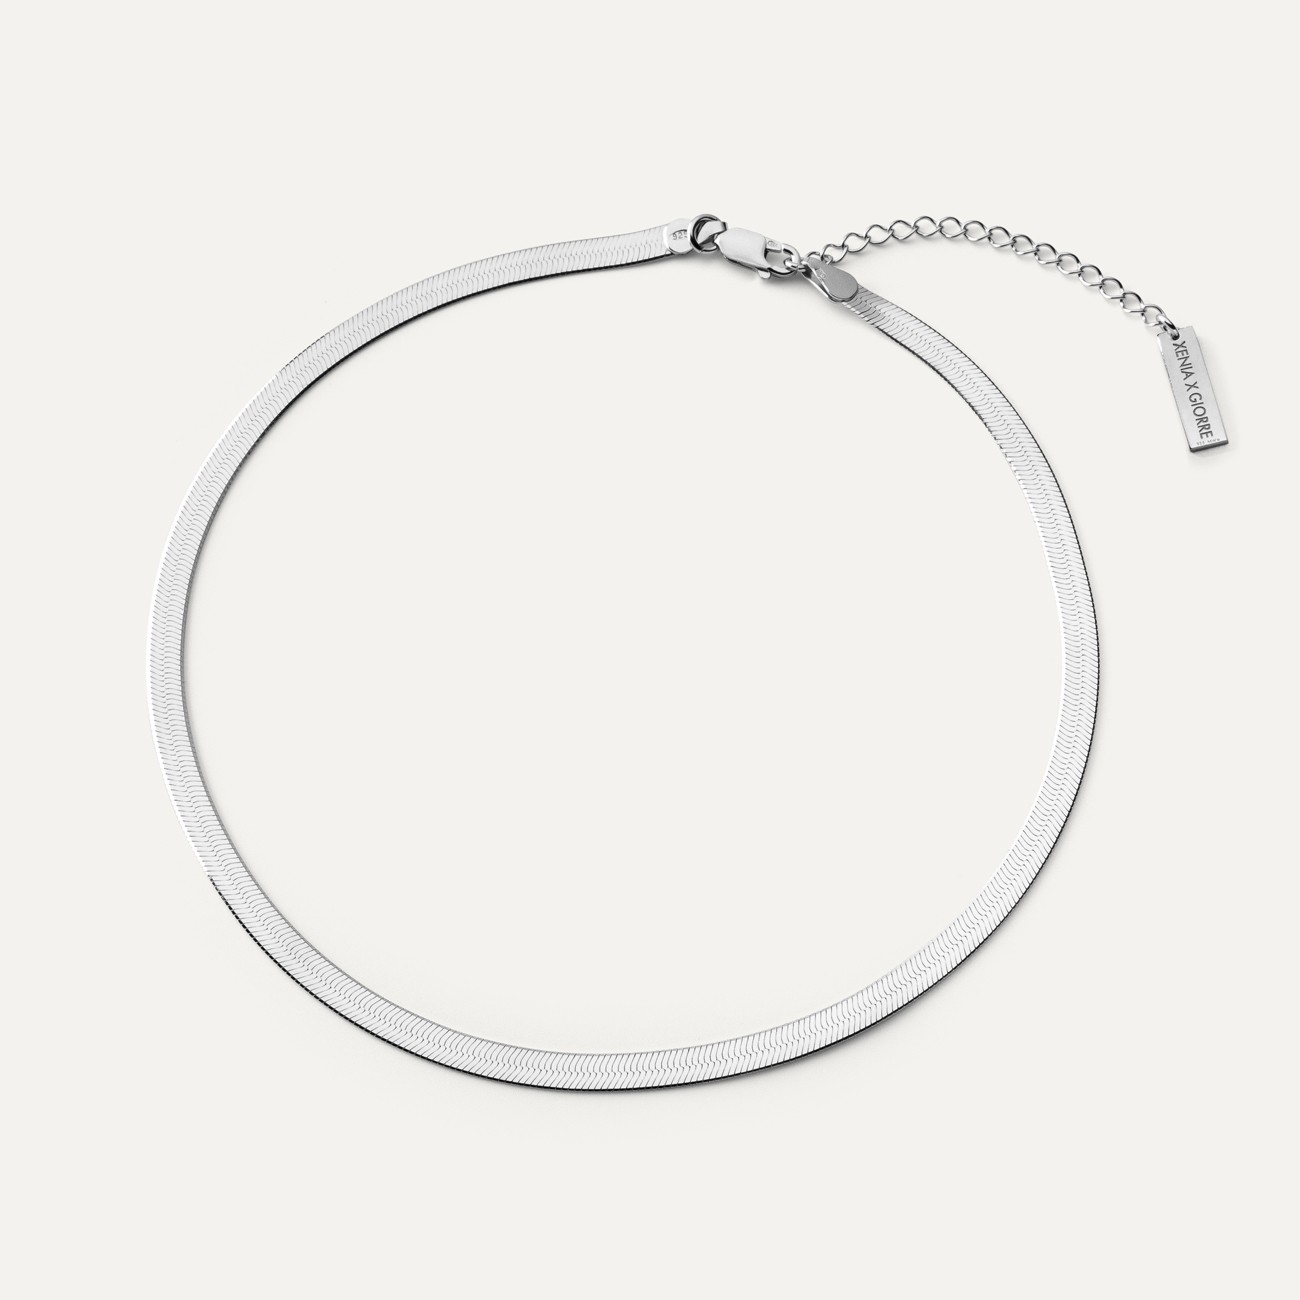 Silver choker flat chain sterling silver 925, Xenia by Giorre